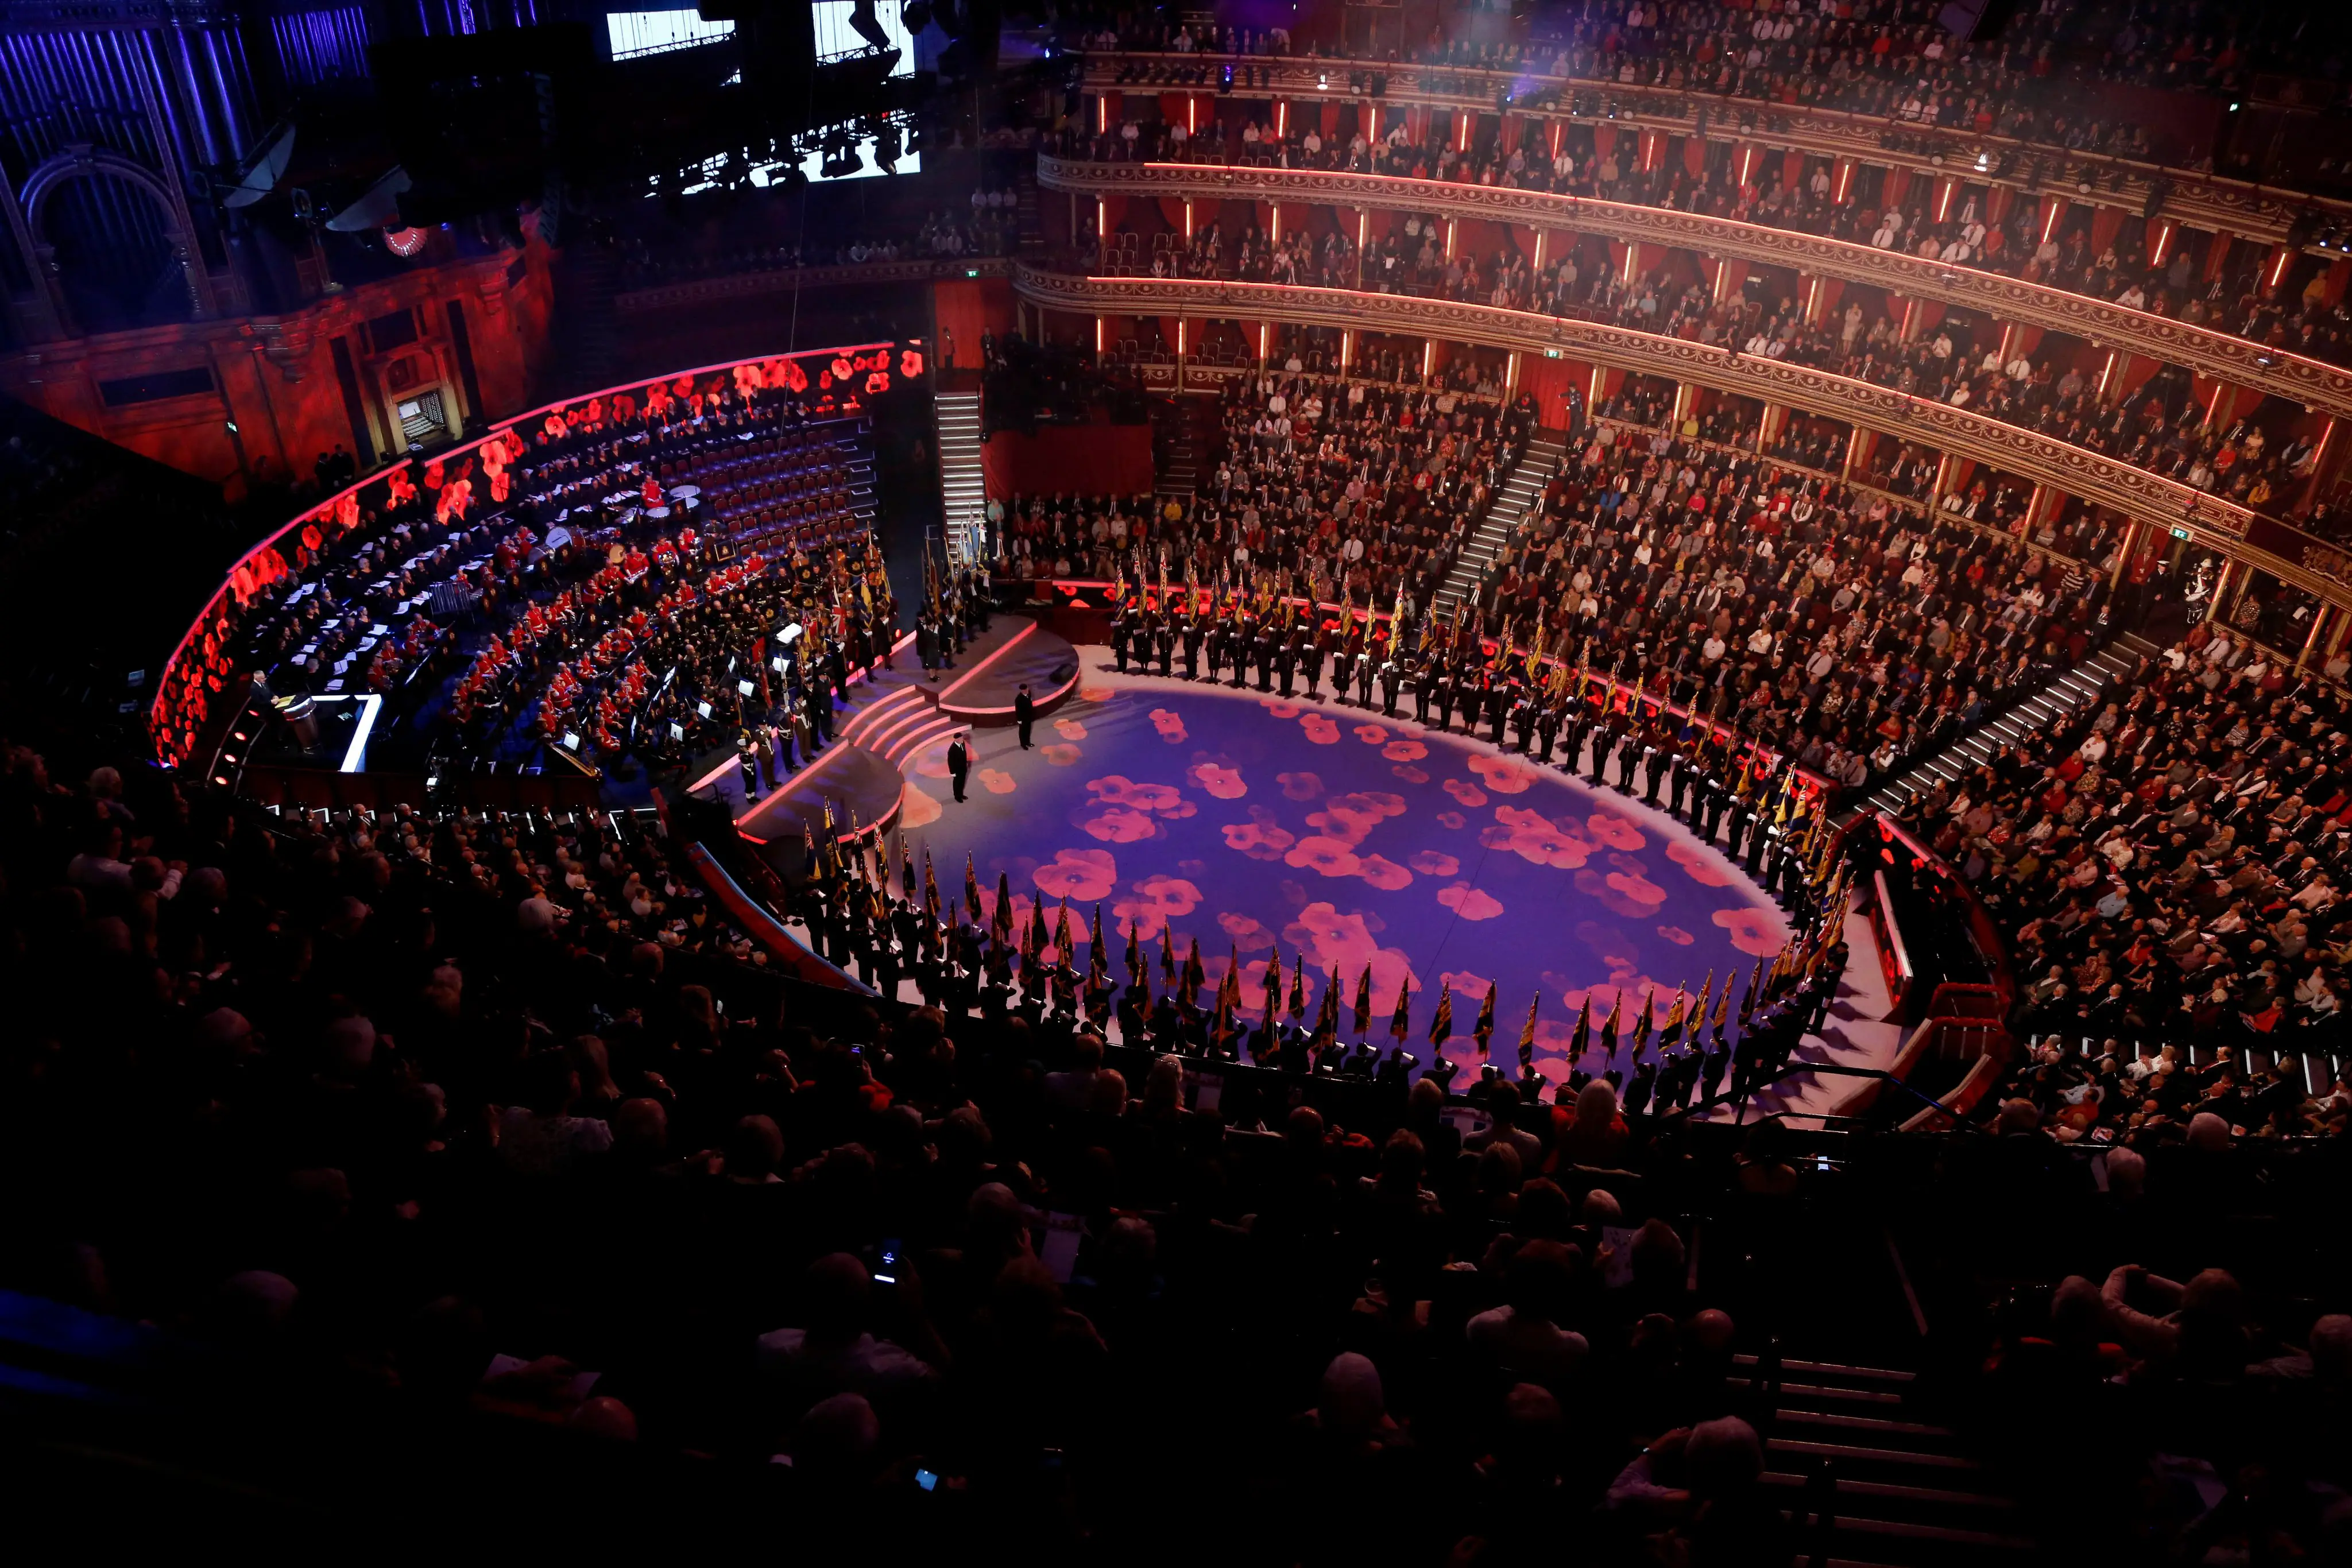 The Festival of Remembrance is annual event held in November before Remembrnce Sunday